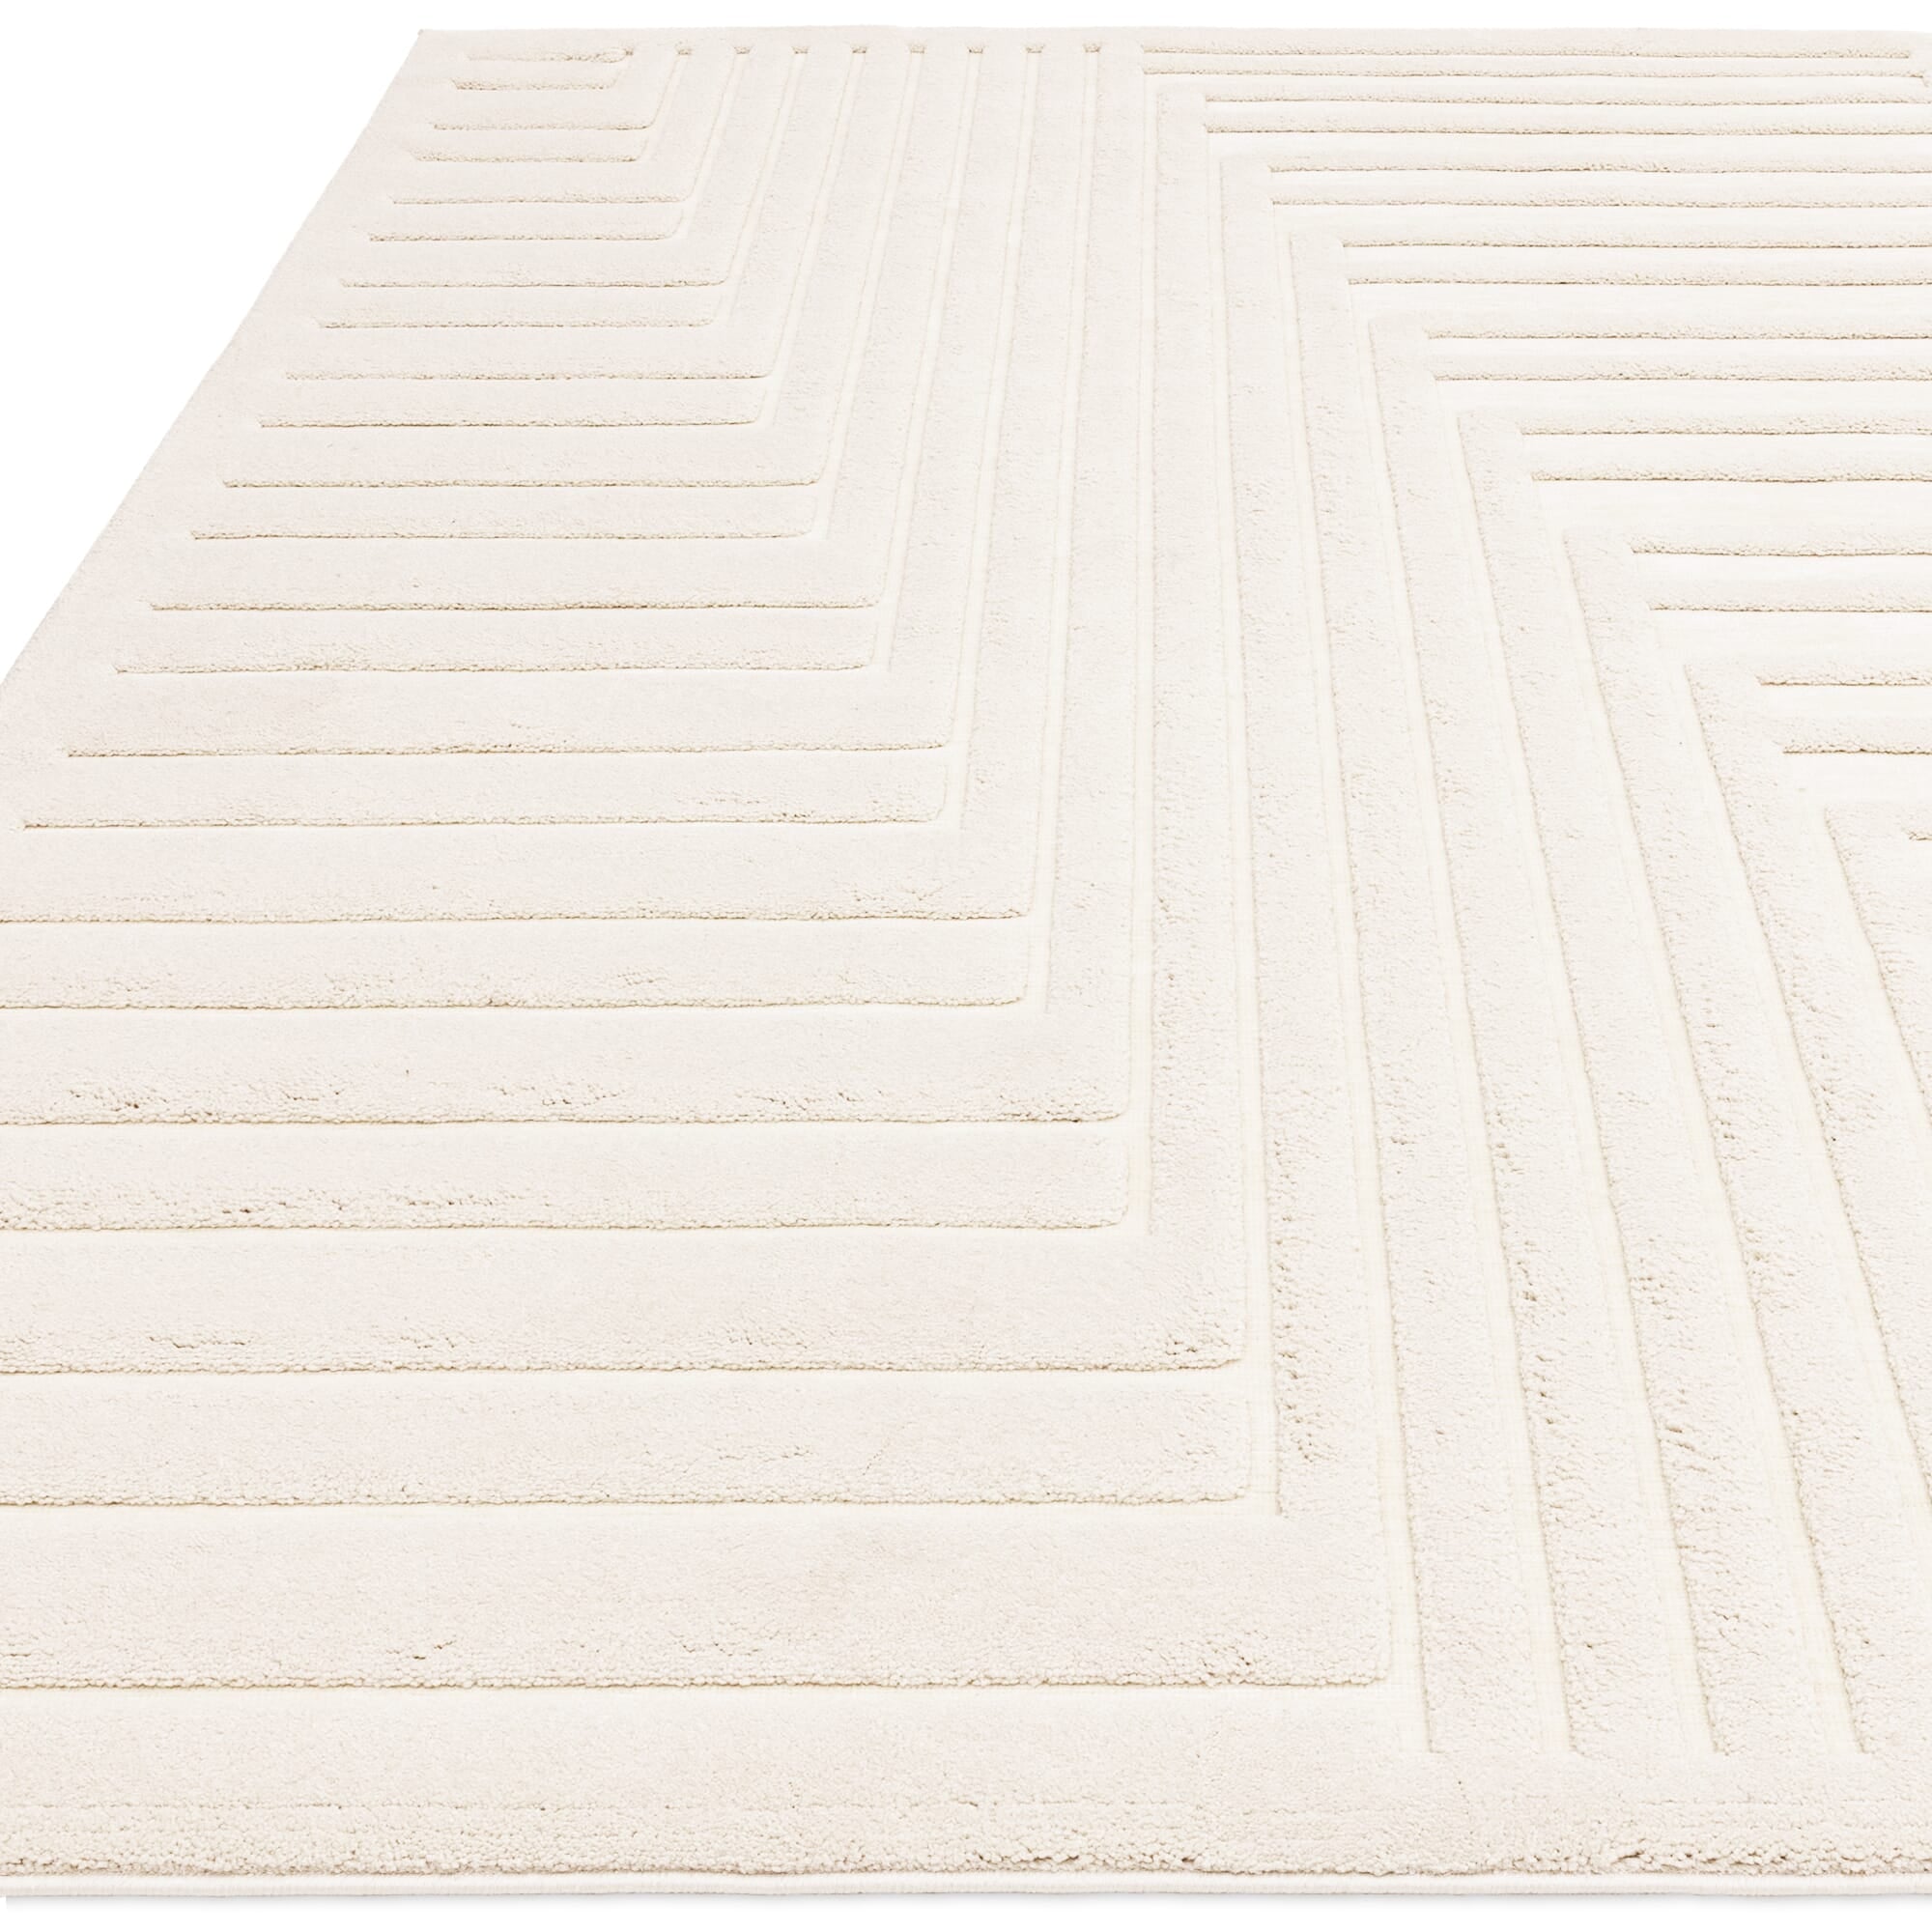 Valley Ivory Connection Rug